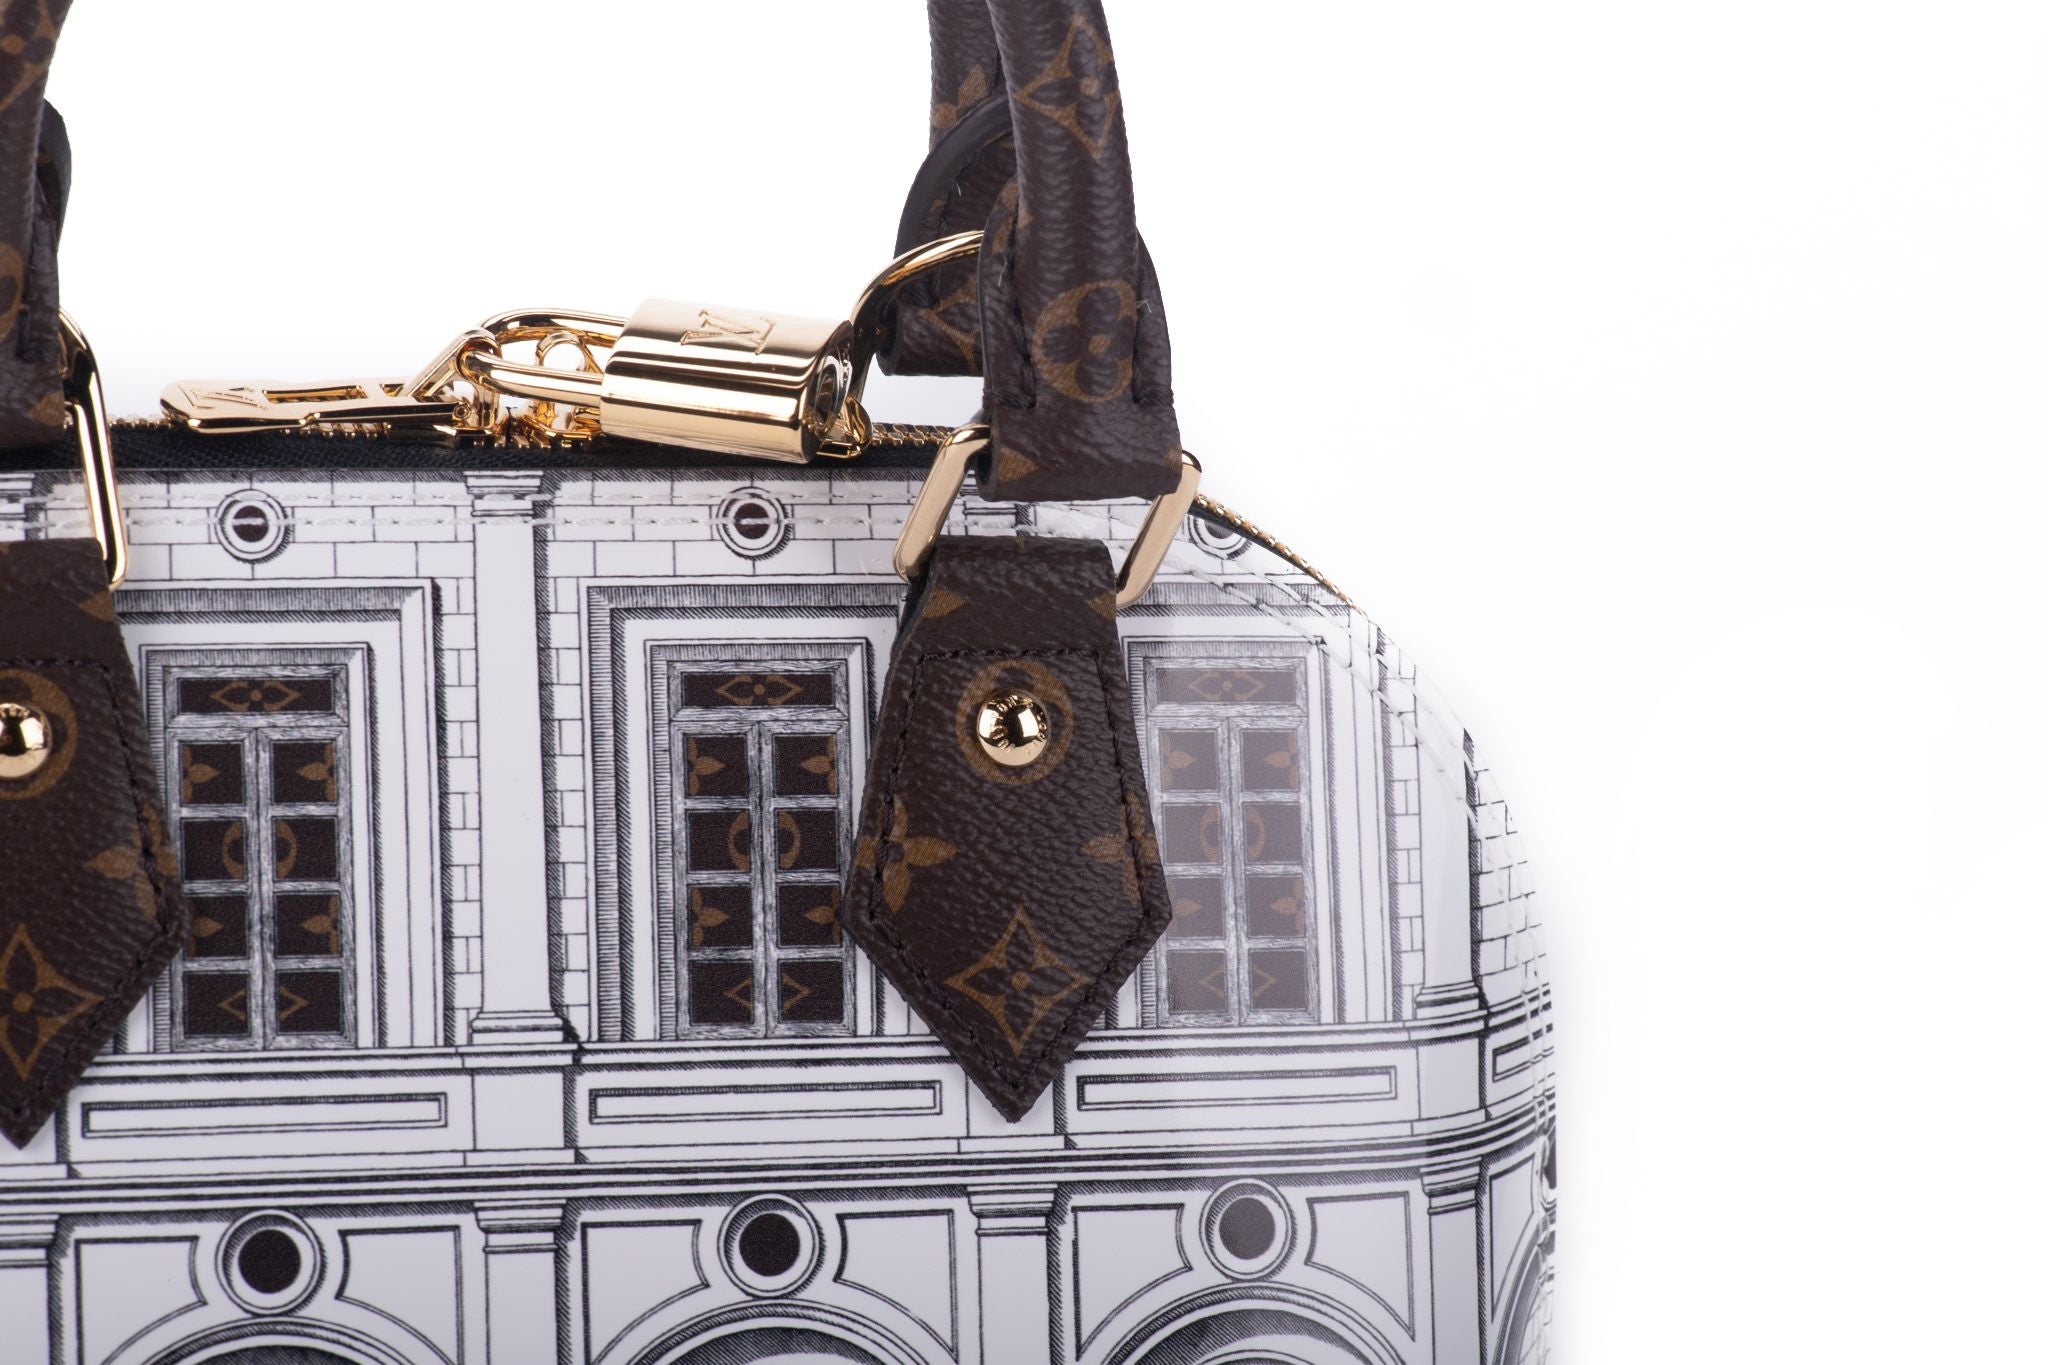 New Louis Vuitton Alma Fornasetti Limited Edition Bag with Box at